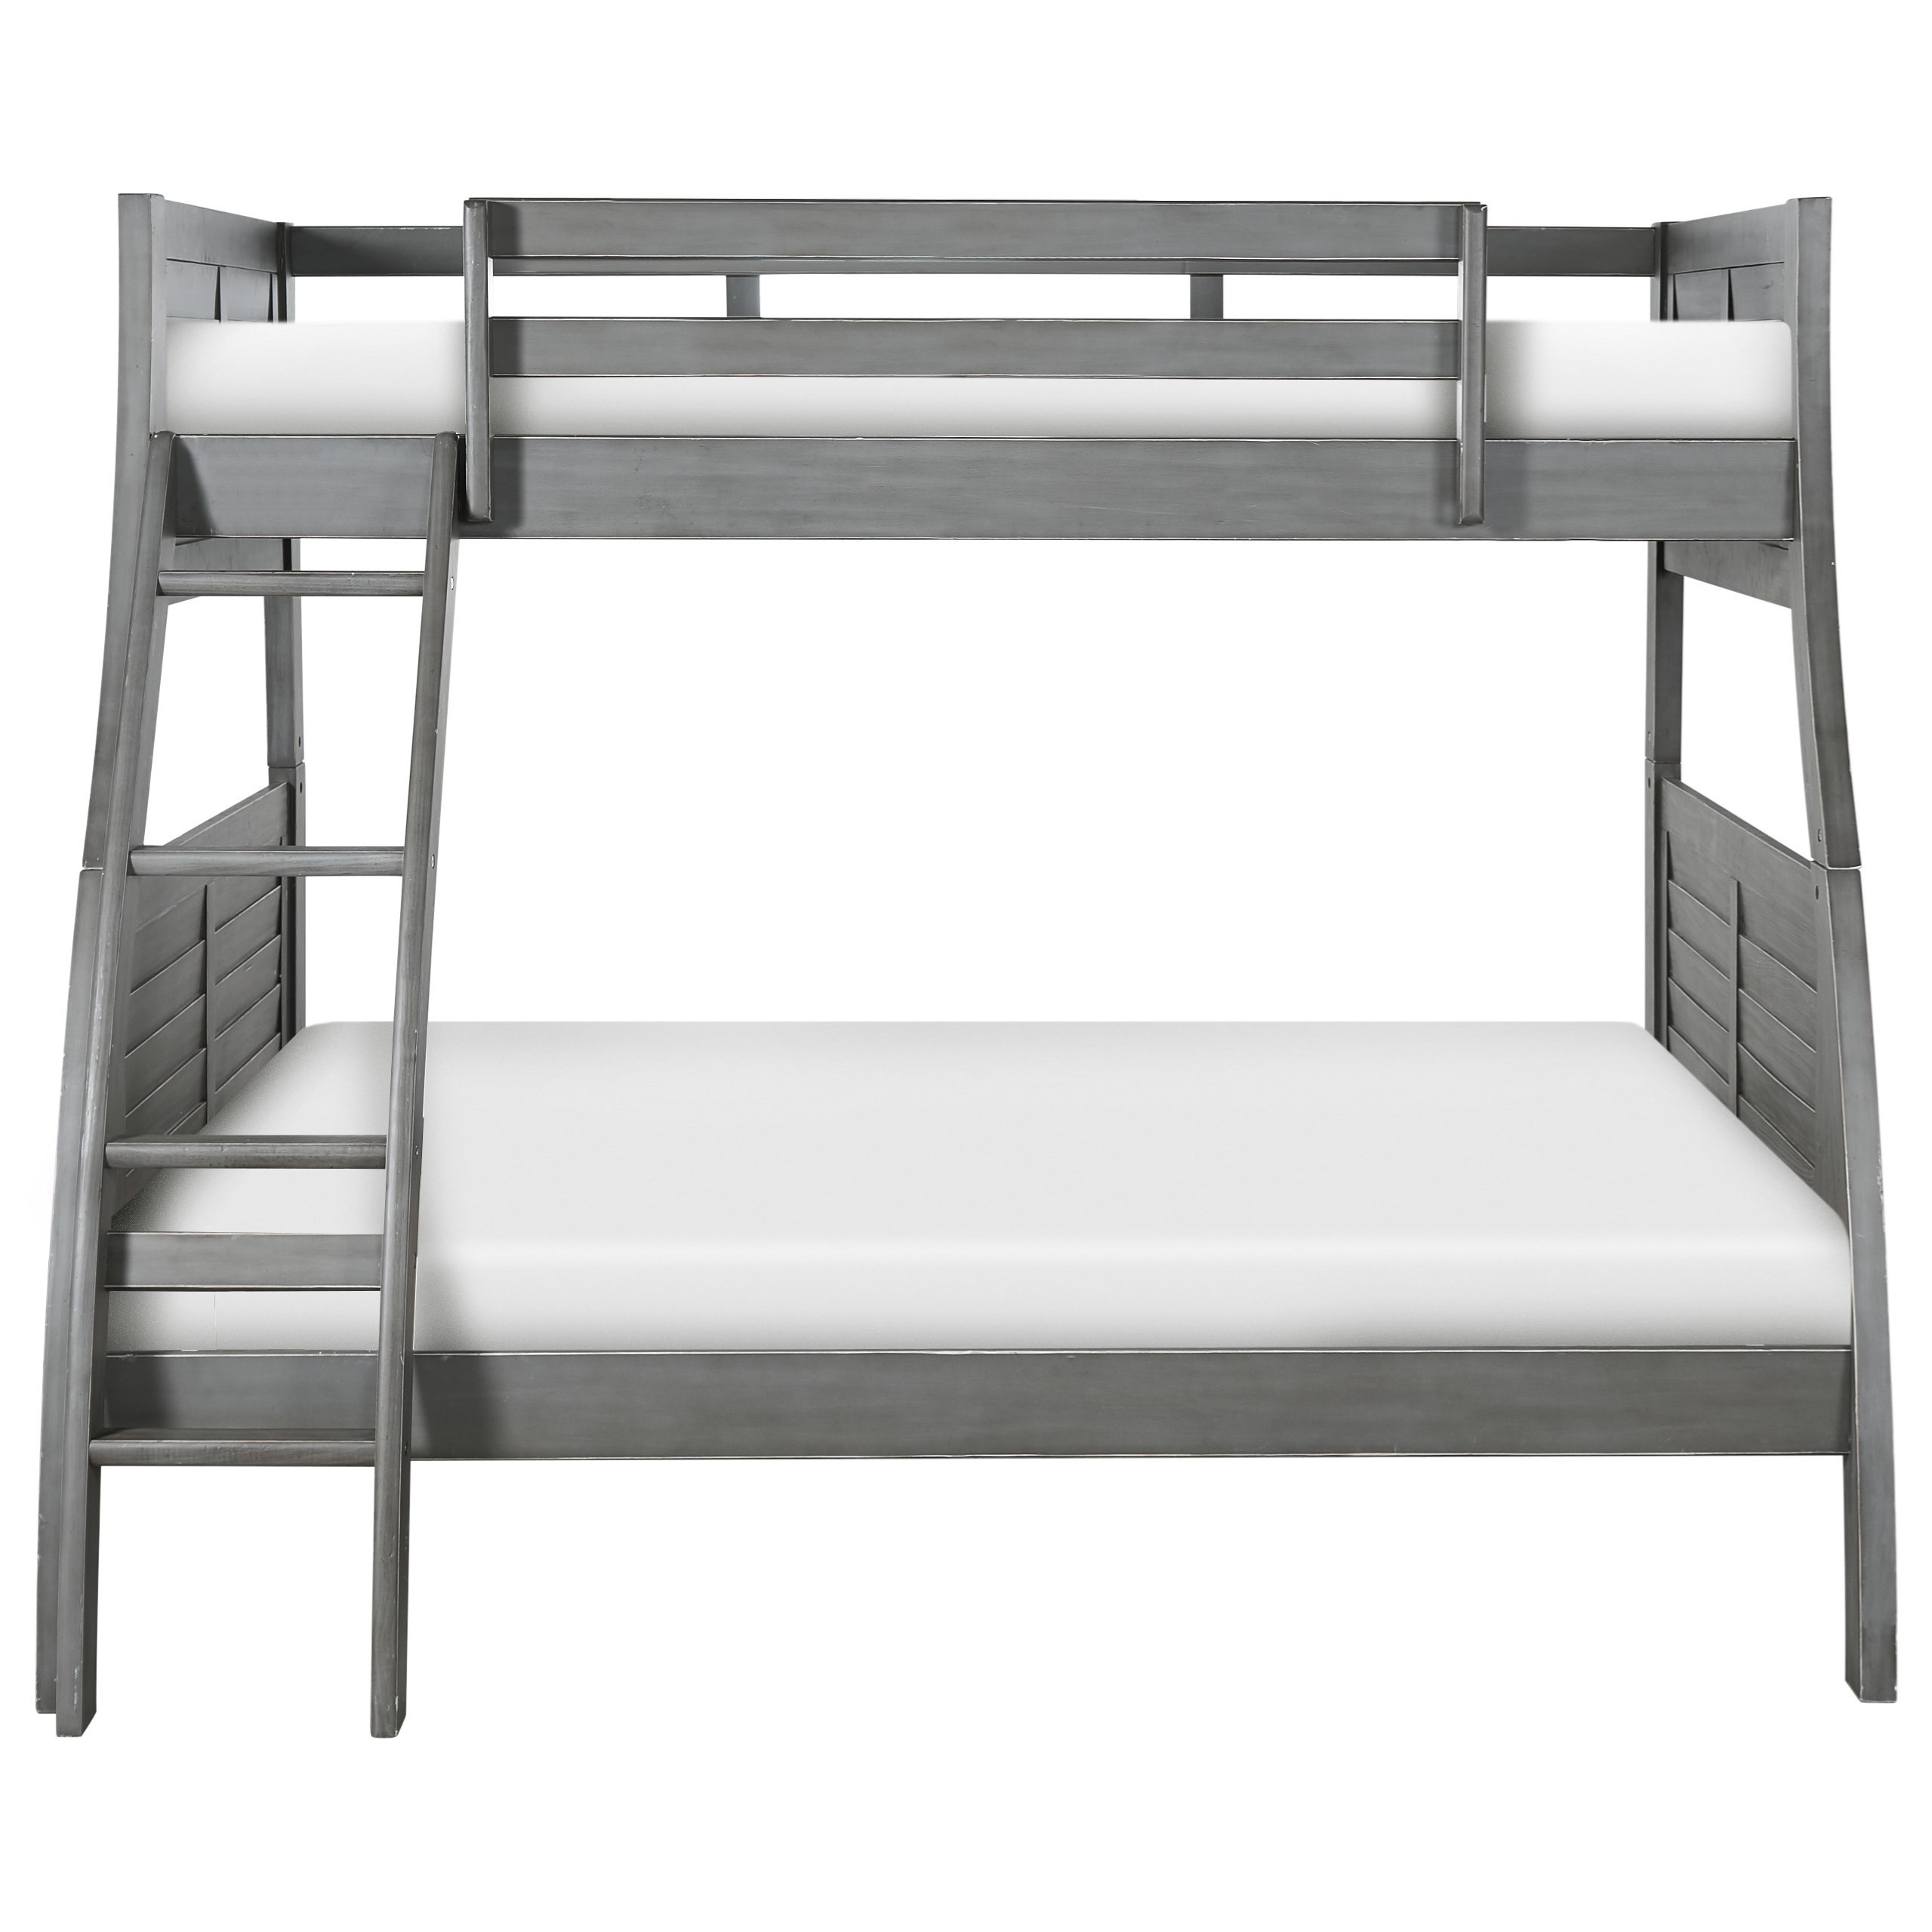 powell bunk bed